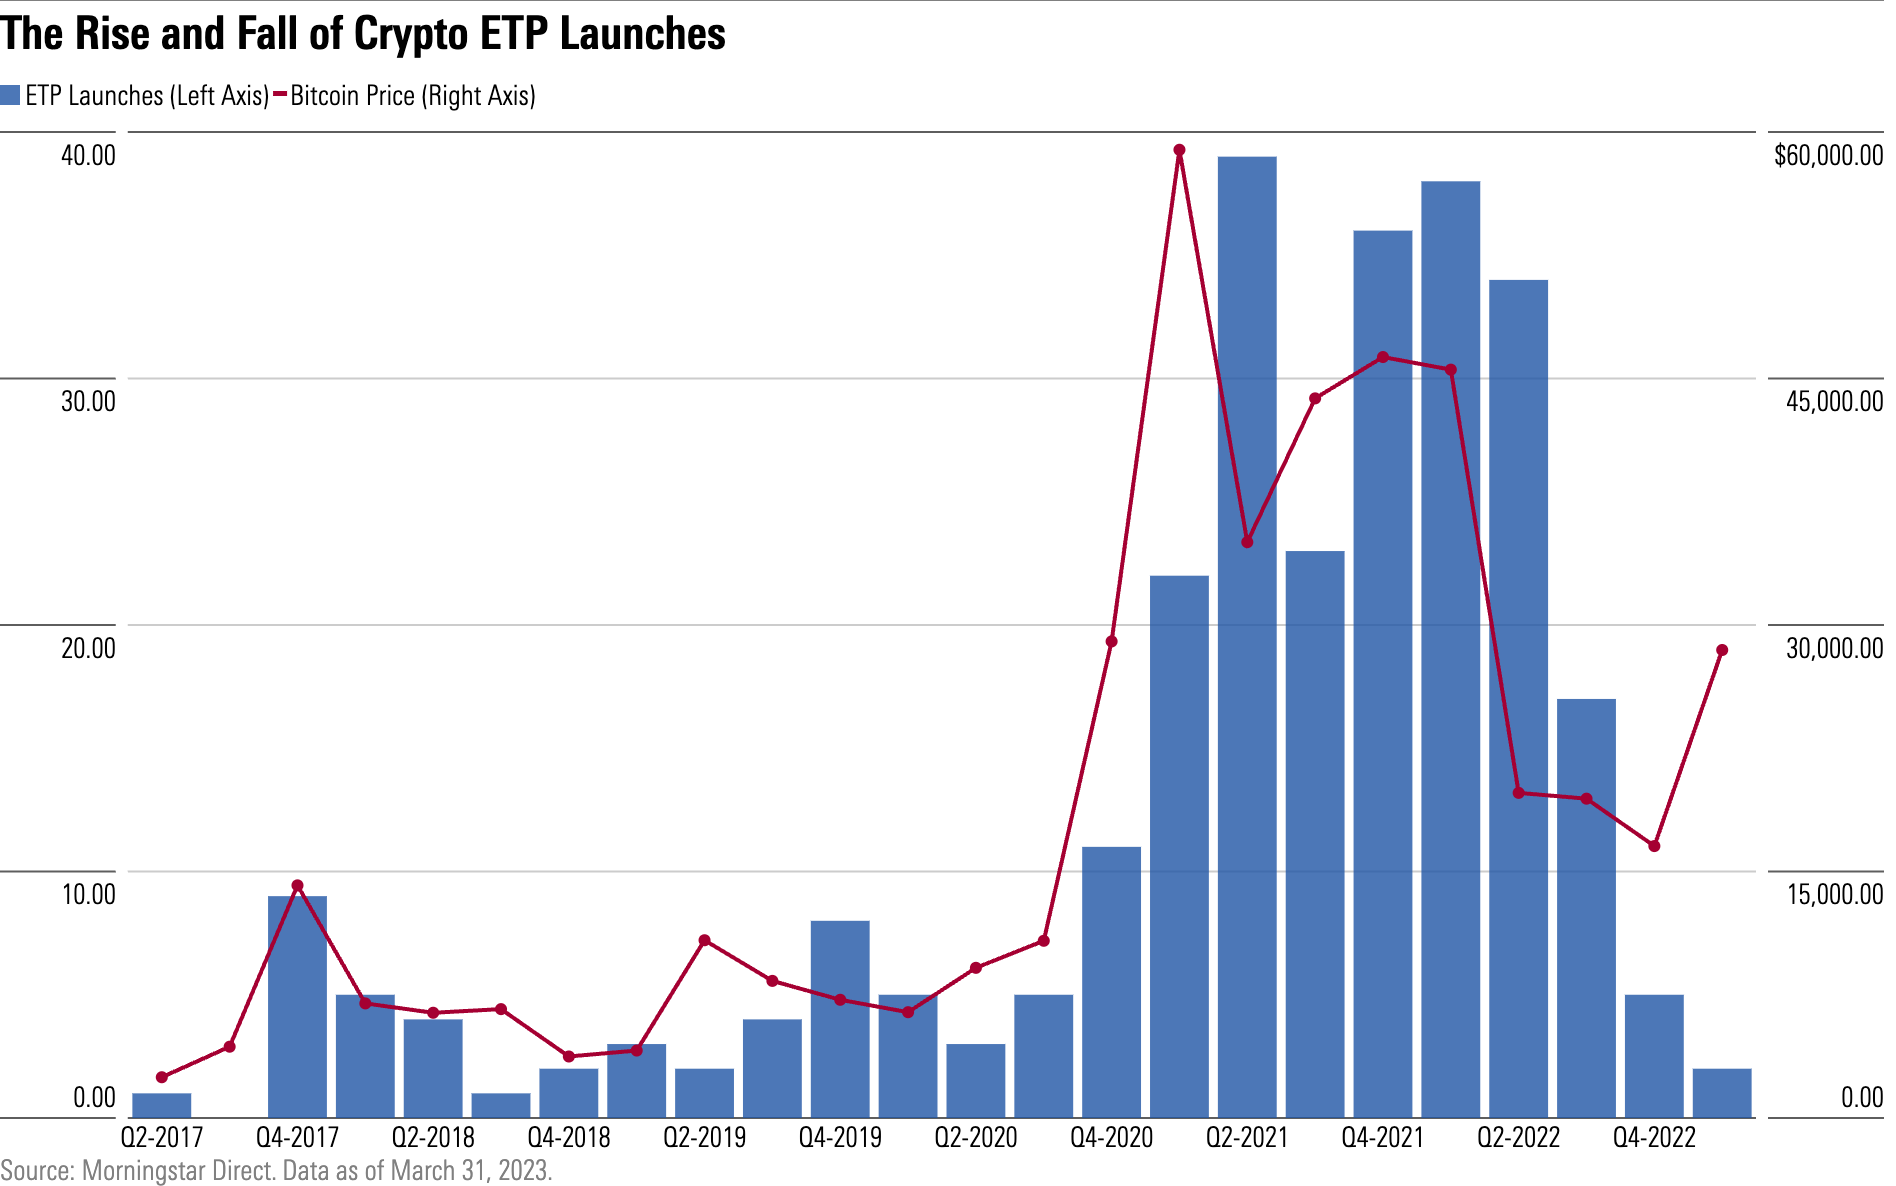 Chart showing the number of crypto ETPs launching each quarter, mapped against the price of bitcoin at the time.